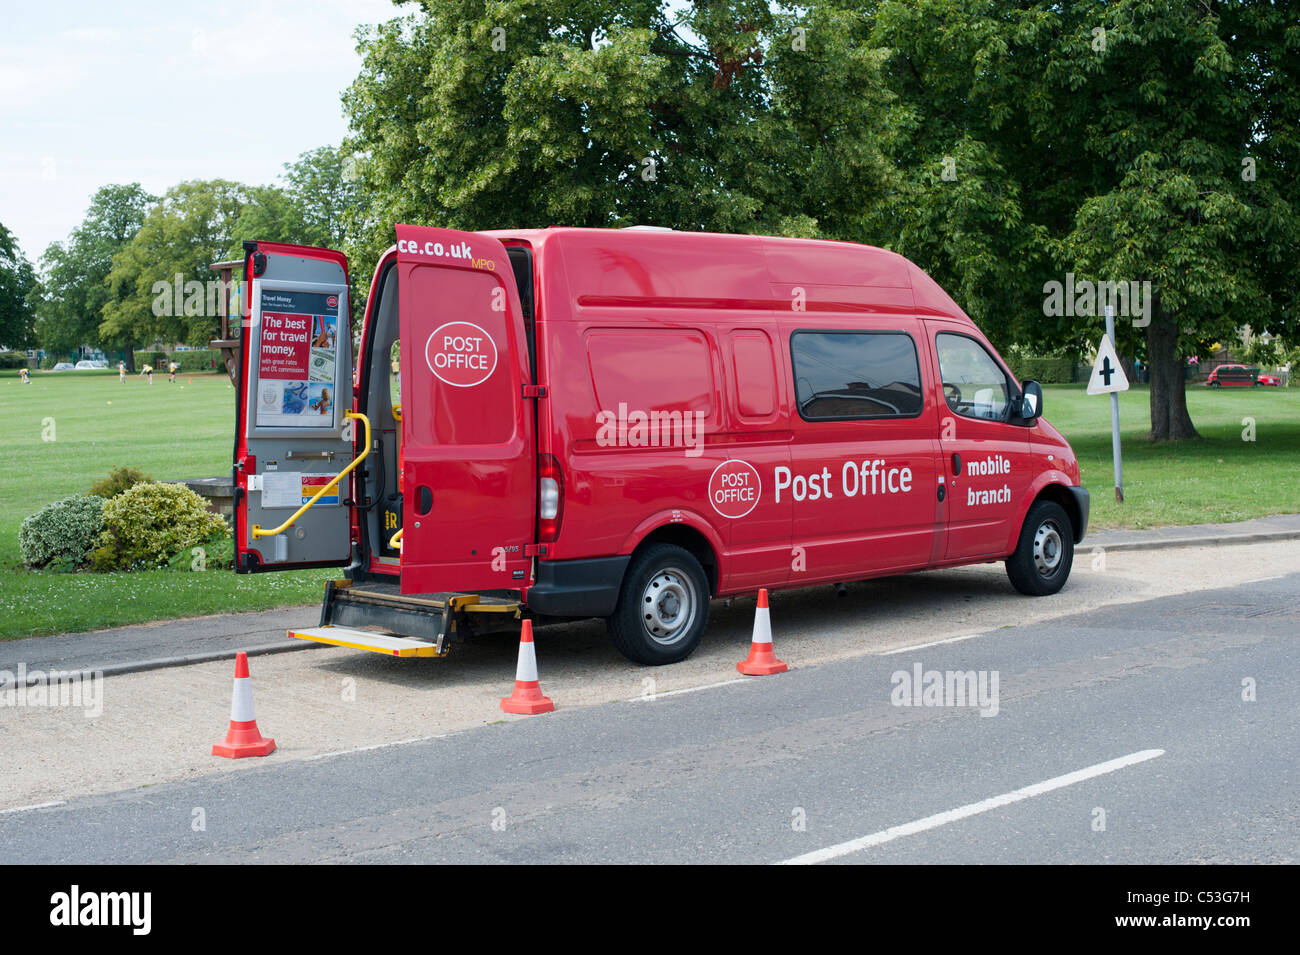 Mobile Post Office Van High Resolution Stock Photography and Images - Alamy